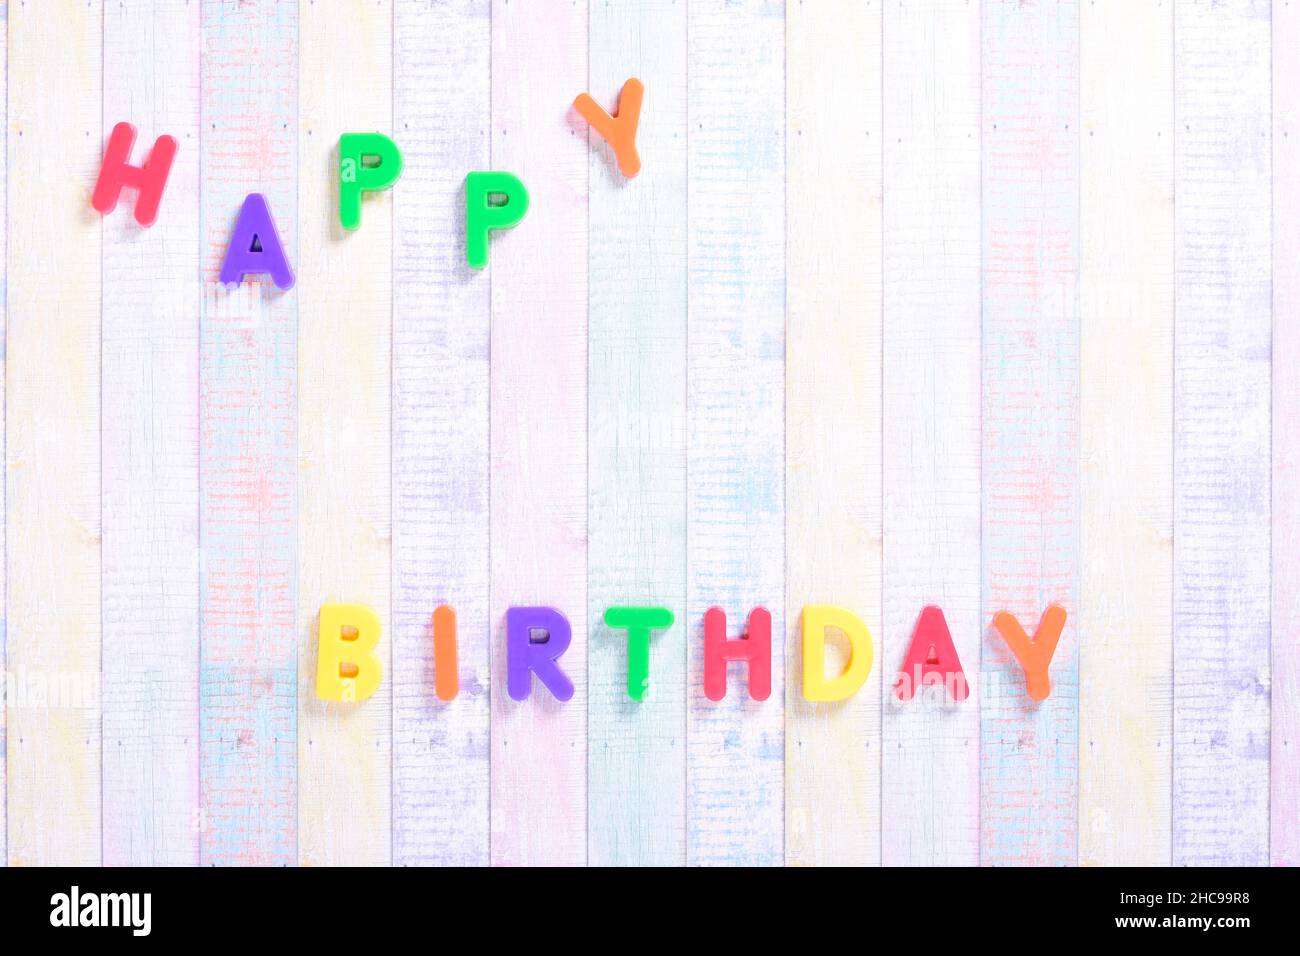 Photograph of some magnet letters with the English text of Happy Birthday on a colored cardboard background.The photograph is shot in horizontal forma Stock Photo